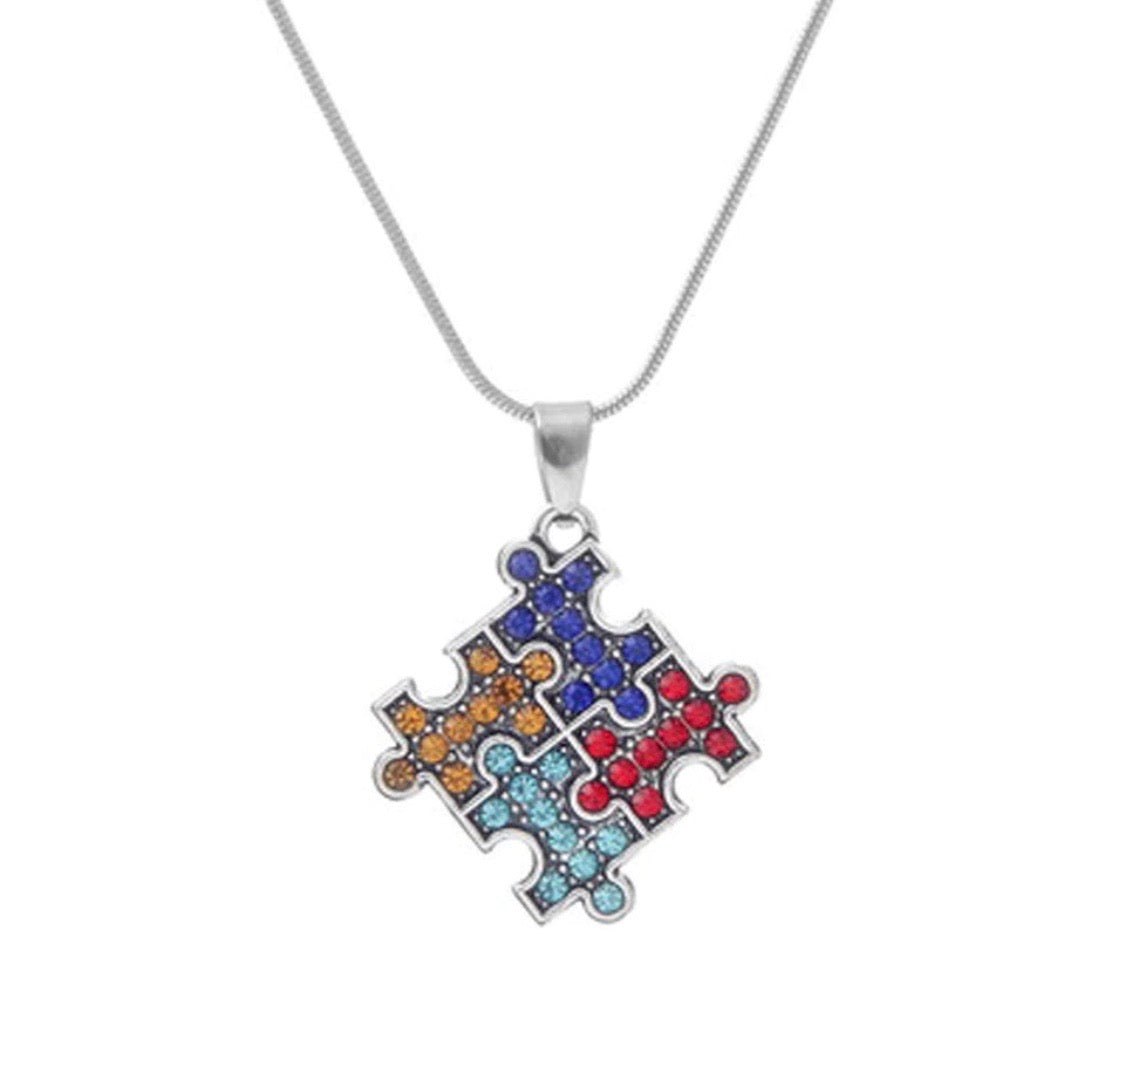 Necklace { Autism } Puzzle pieces • Silver • Rhinestones • 20 inches • $5 jewelry - Stacy's Pink Martini Boutique